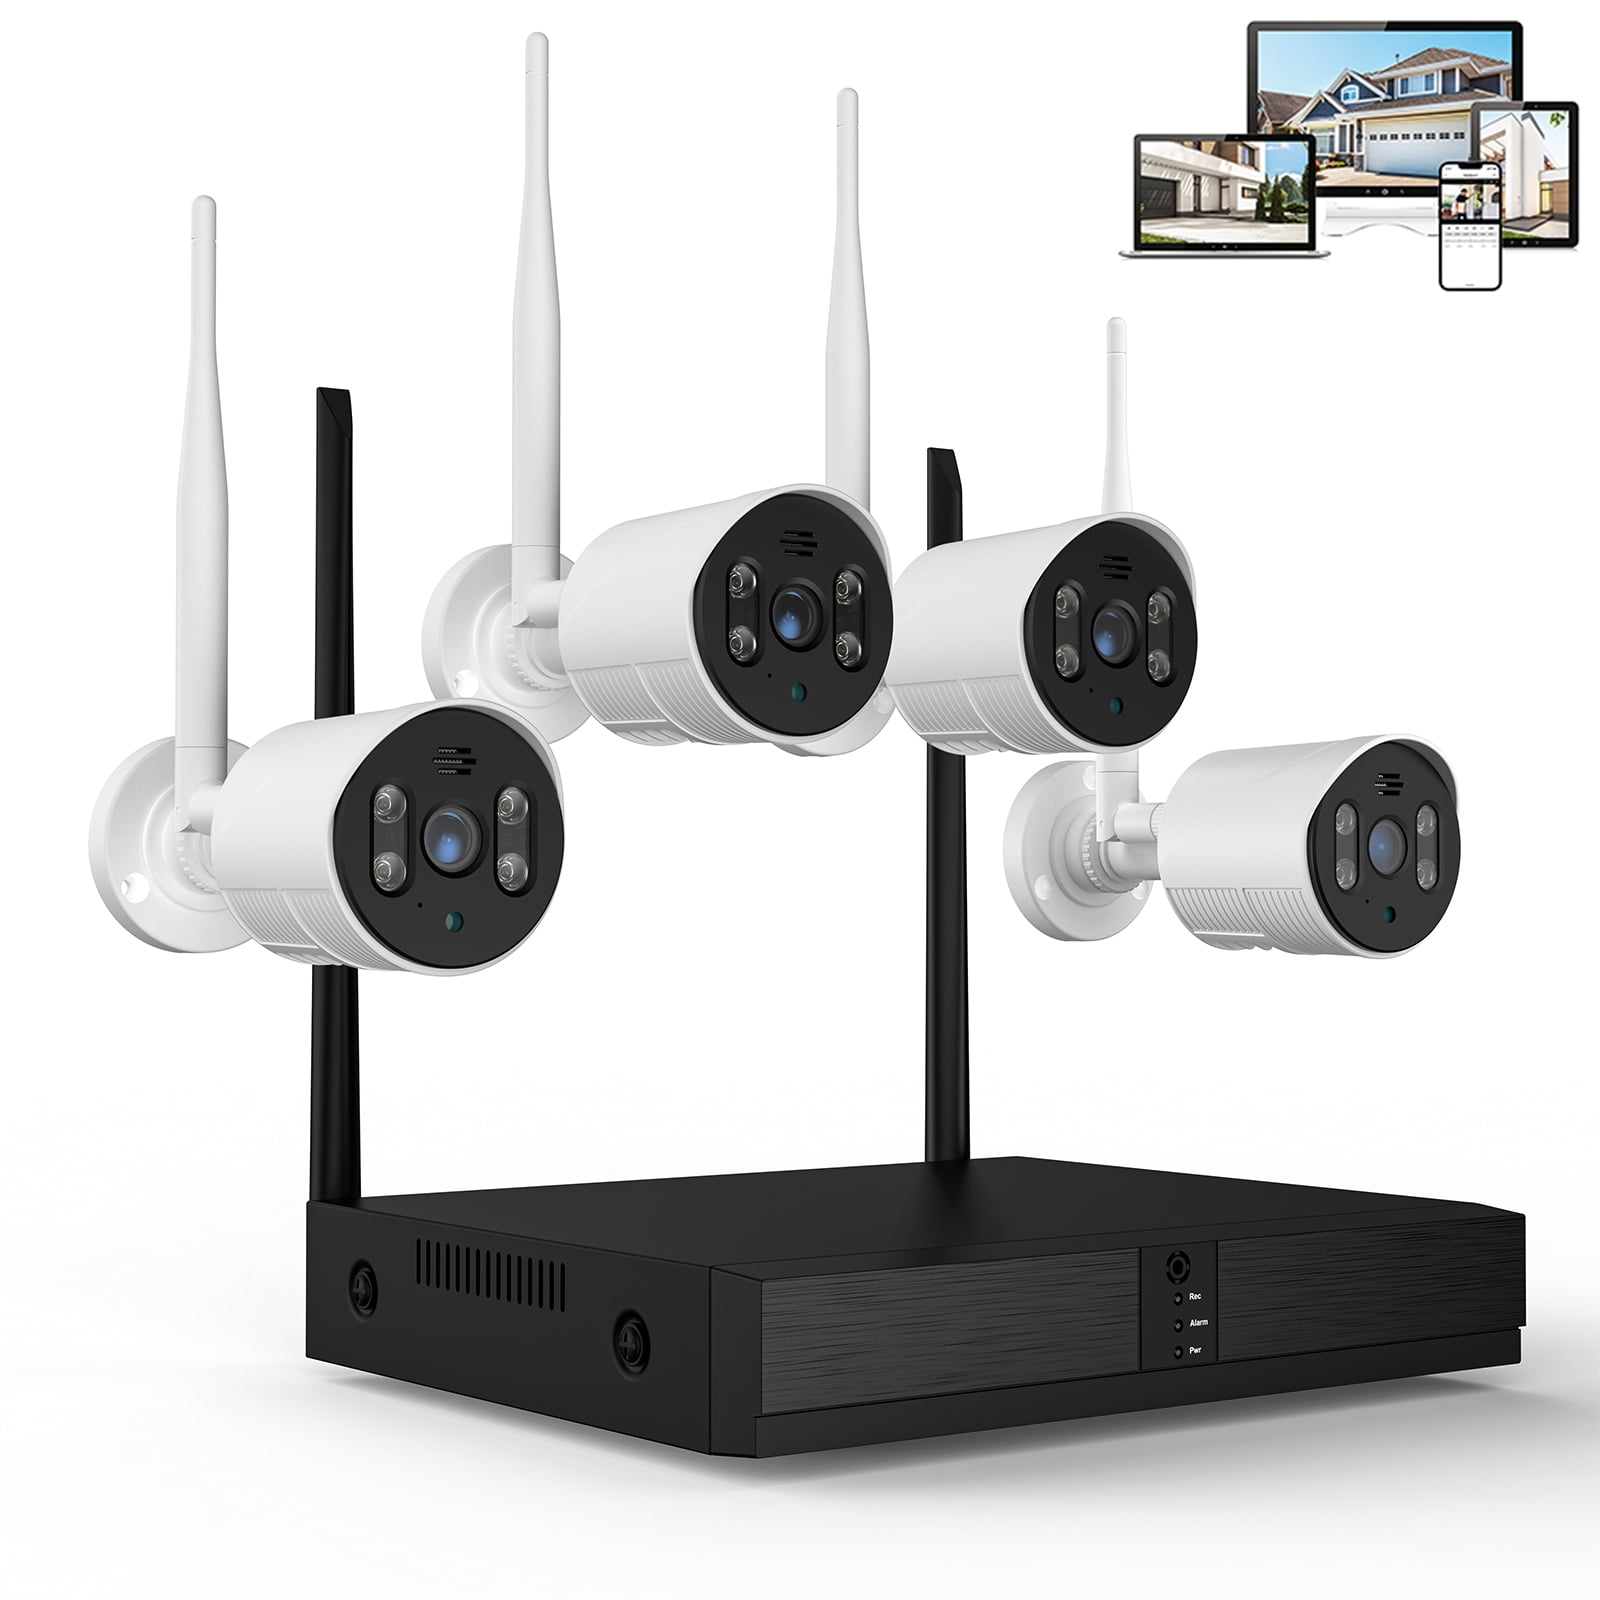 TopVision 8-Channel 3MP NVR w/ 4 Wired 1080P HD Waterproof Security Cameras w/ Color Night Vision (White) $99 + Free Shipping